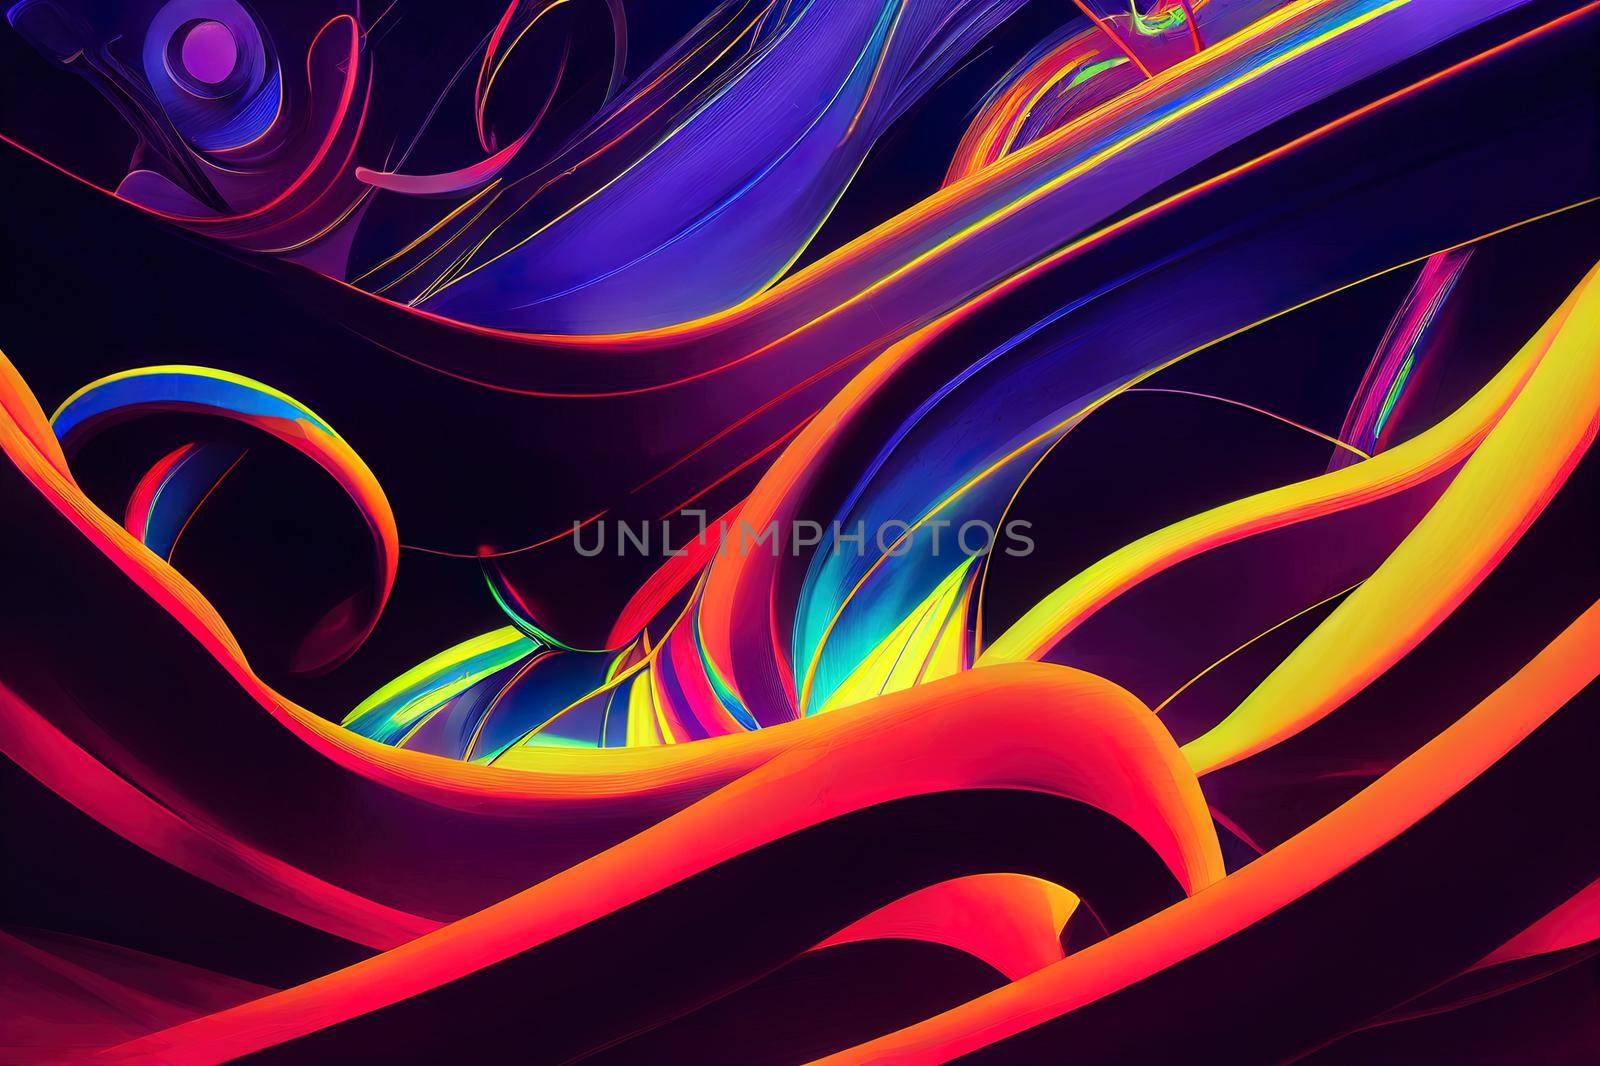 3d rendering, glowing lines, neon lights, abstract psychedelic background, by 2ragon